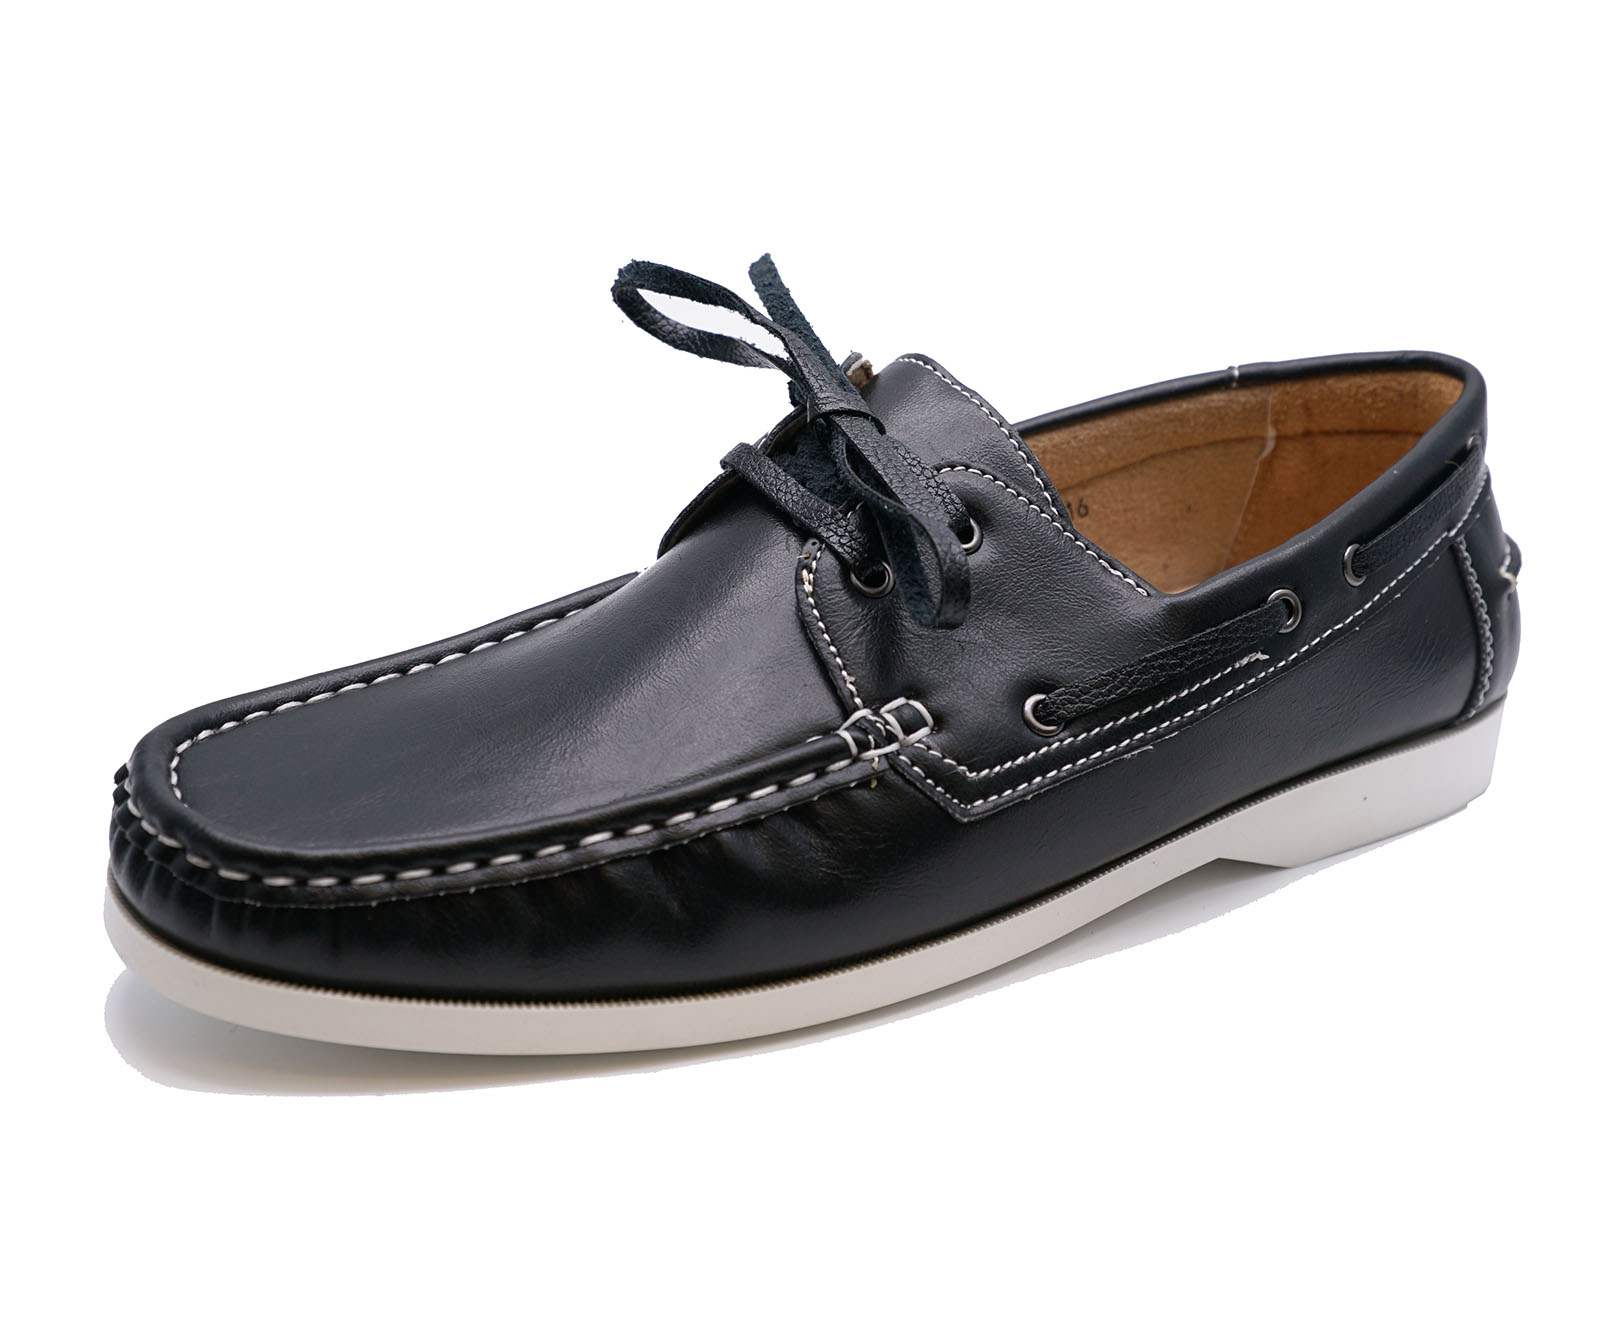 MENS BLACK LACE-UP MOCCASINS LOAFERS DRIVING COMFY BOAT DECK CASUAL ...